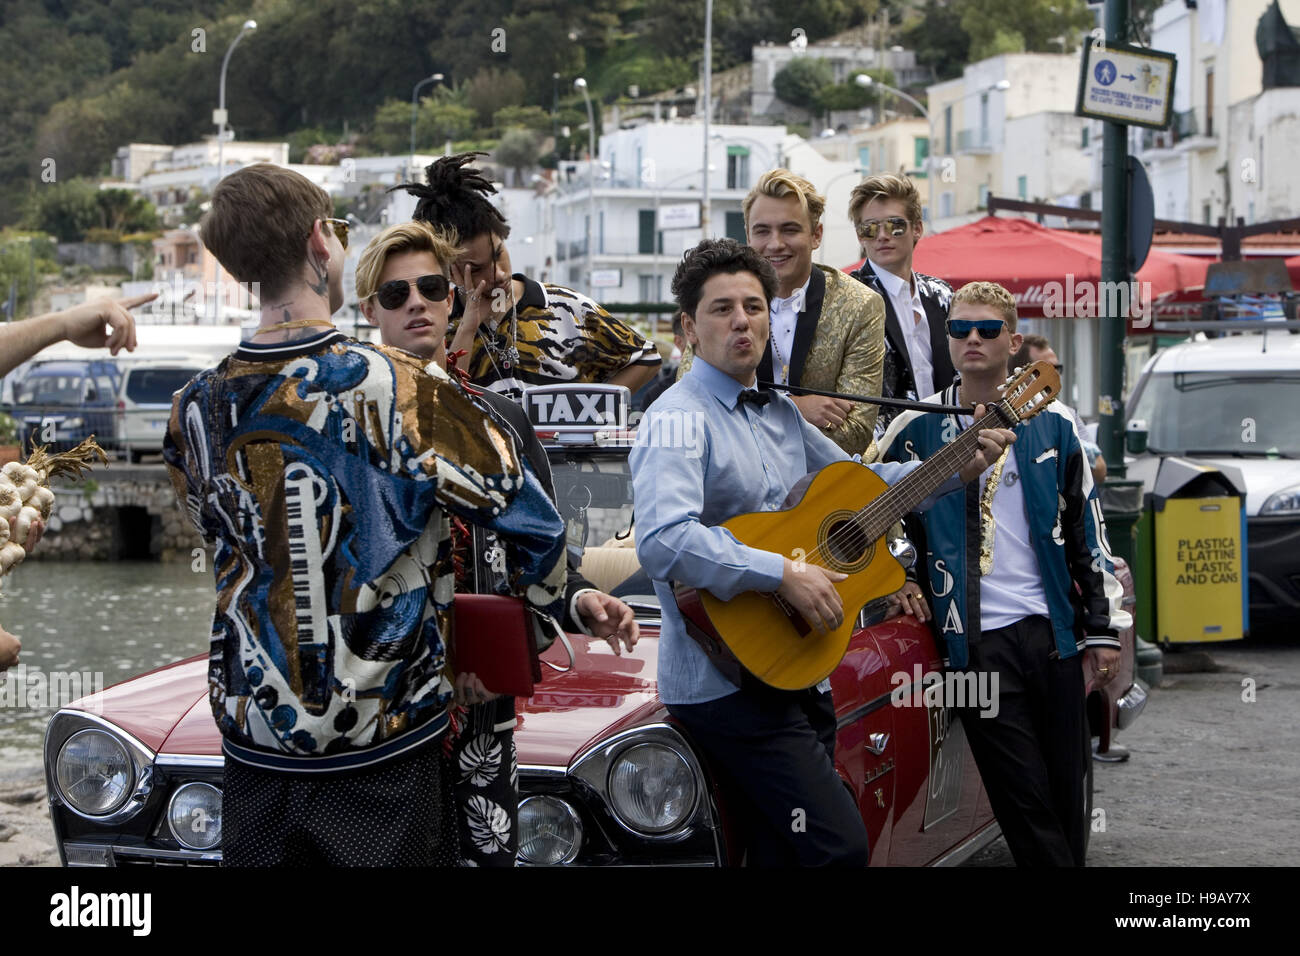 Dolce & Gabbana shoot their next advertising campaign in Capri  Featuring: Gabriel Kane, Cameron Dallas, Luka Sabbat, Presley Gerber Where: Capri, Italy When: 20 Oct 2016 Credit: IPA/WENN.com  **Only available for publication in UK, USA, Germany, Austria, Stock Photo